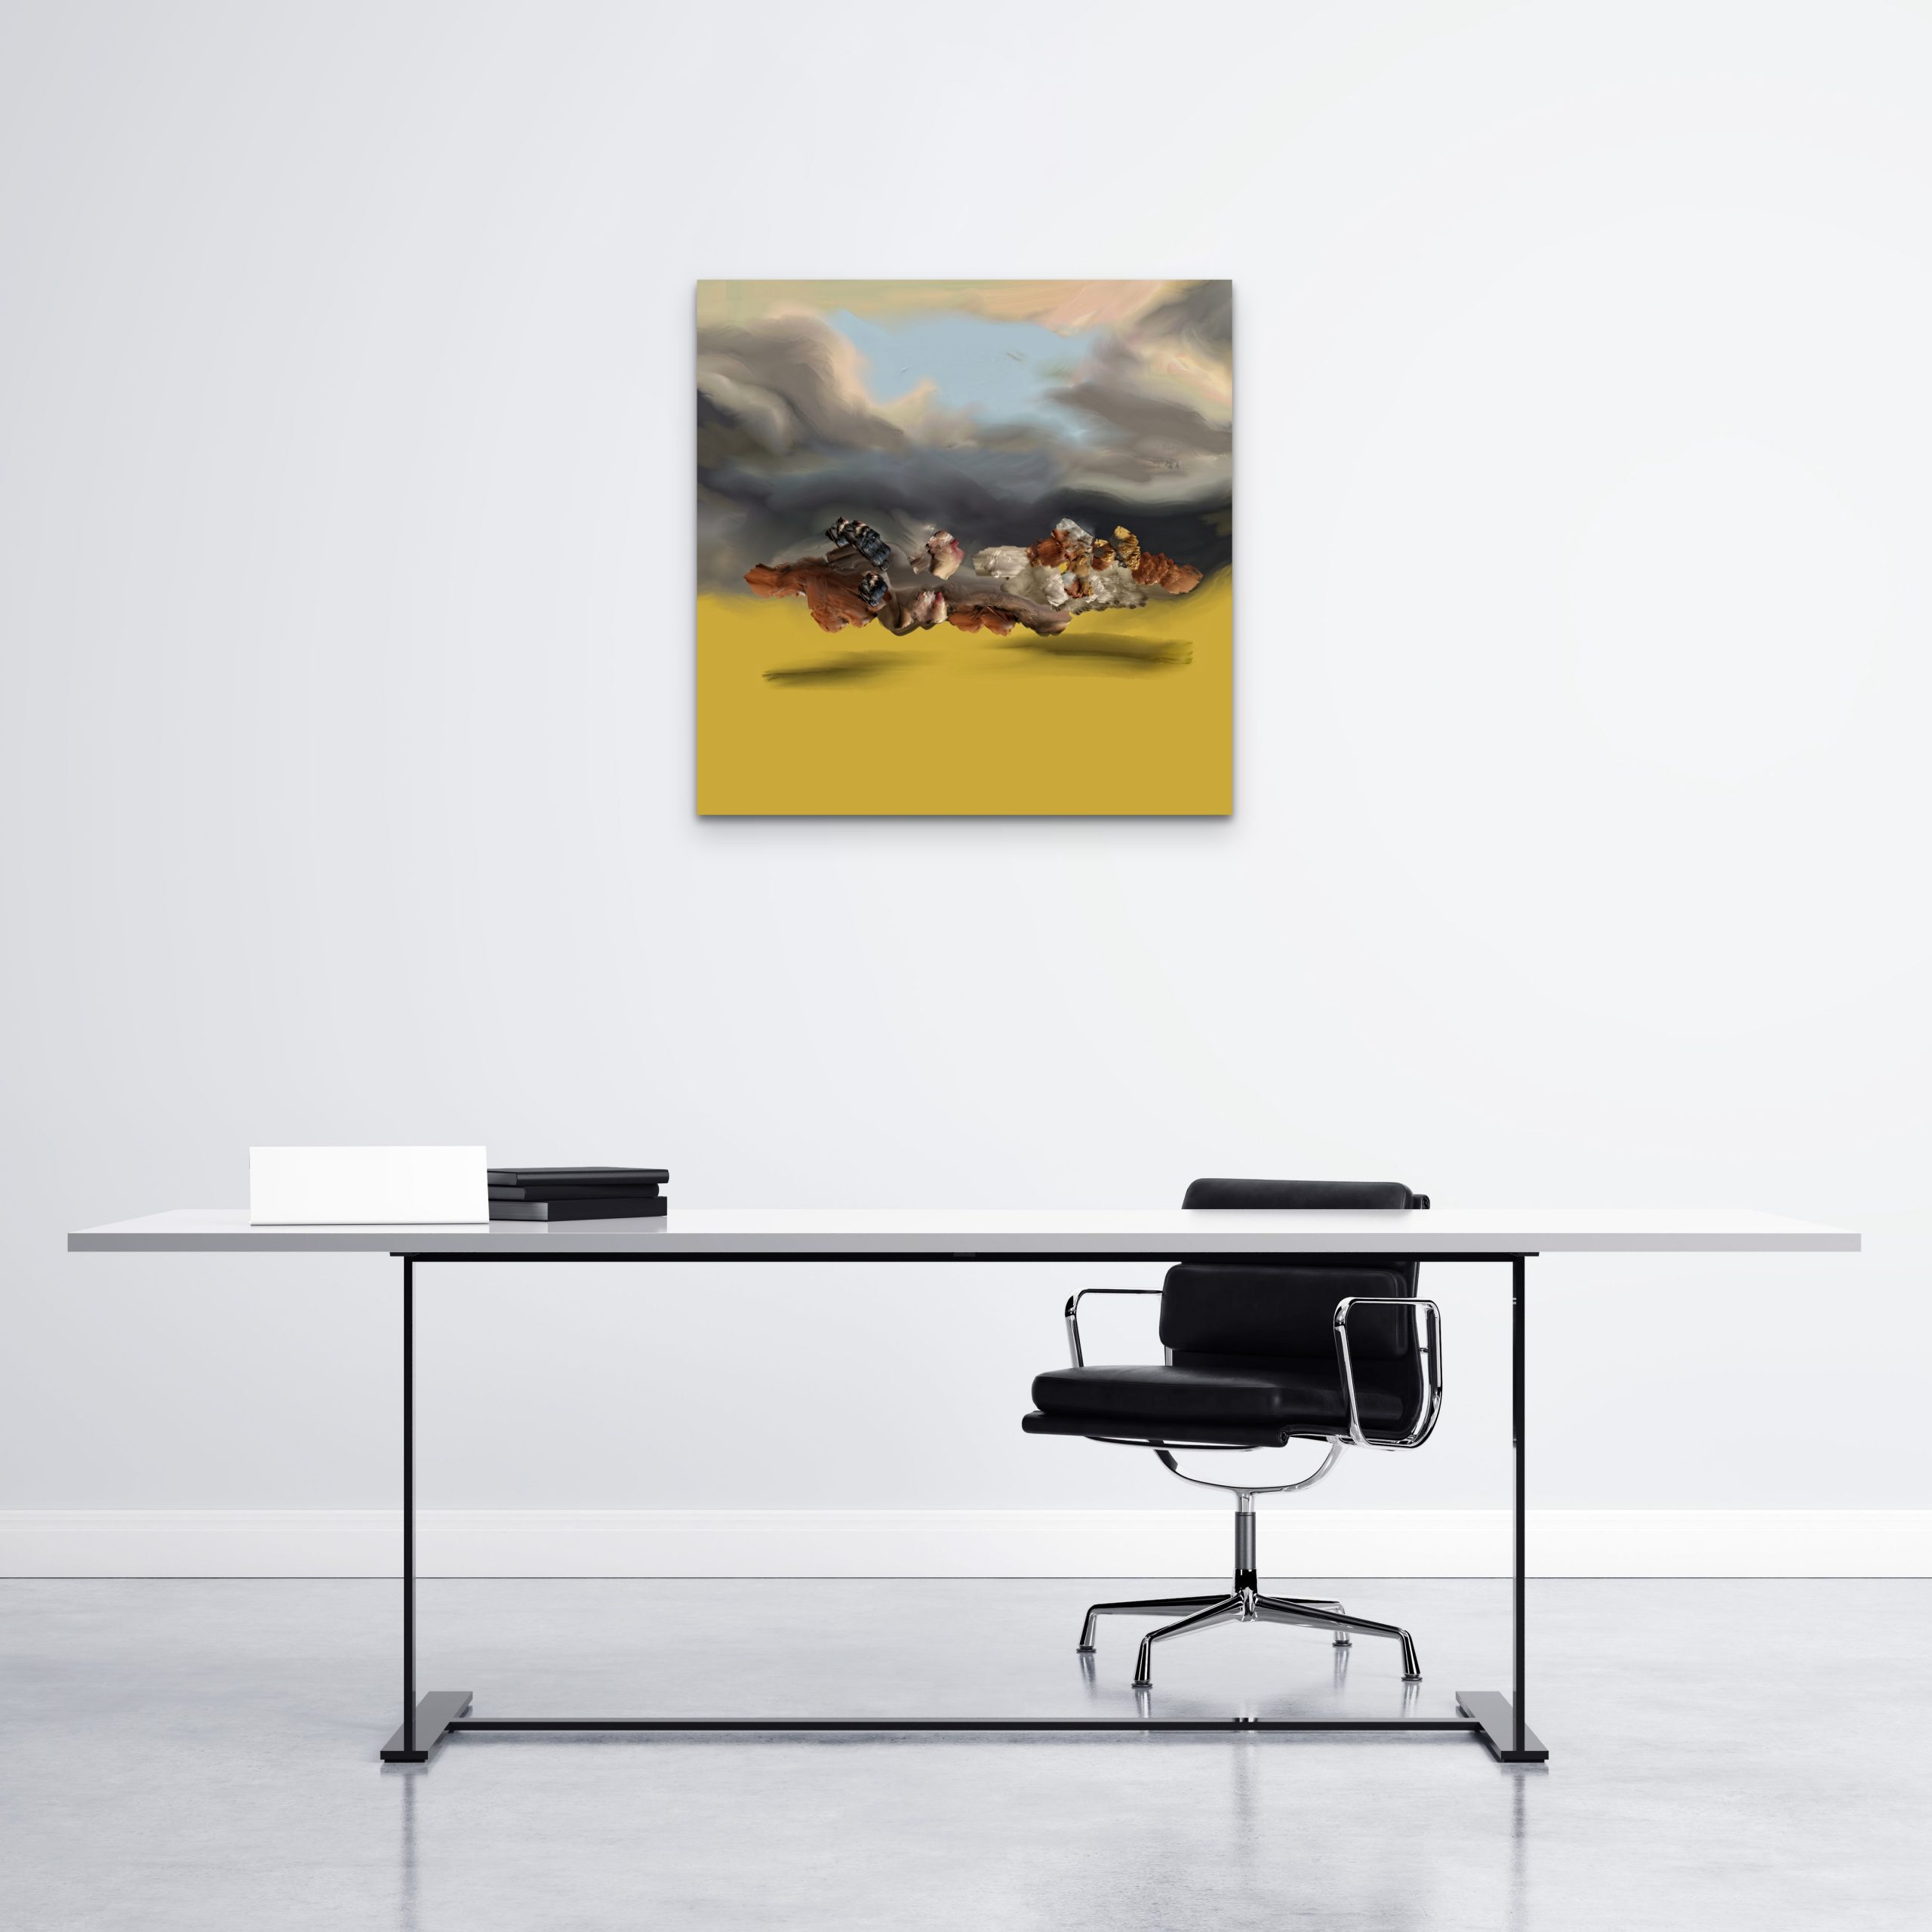 An artwork measuring 24 x 24 inches displayed in an office setting. The colourful piece adds a touch of creativity and vibrancy to the workspace, enhancing the overall aesthetic appeal.